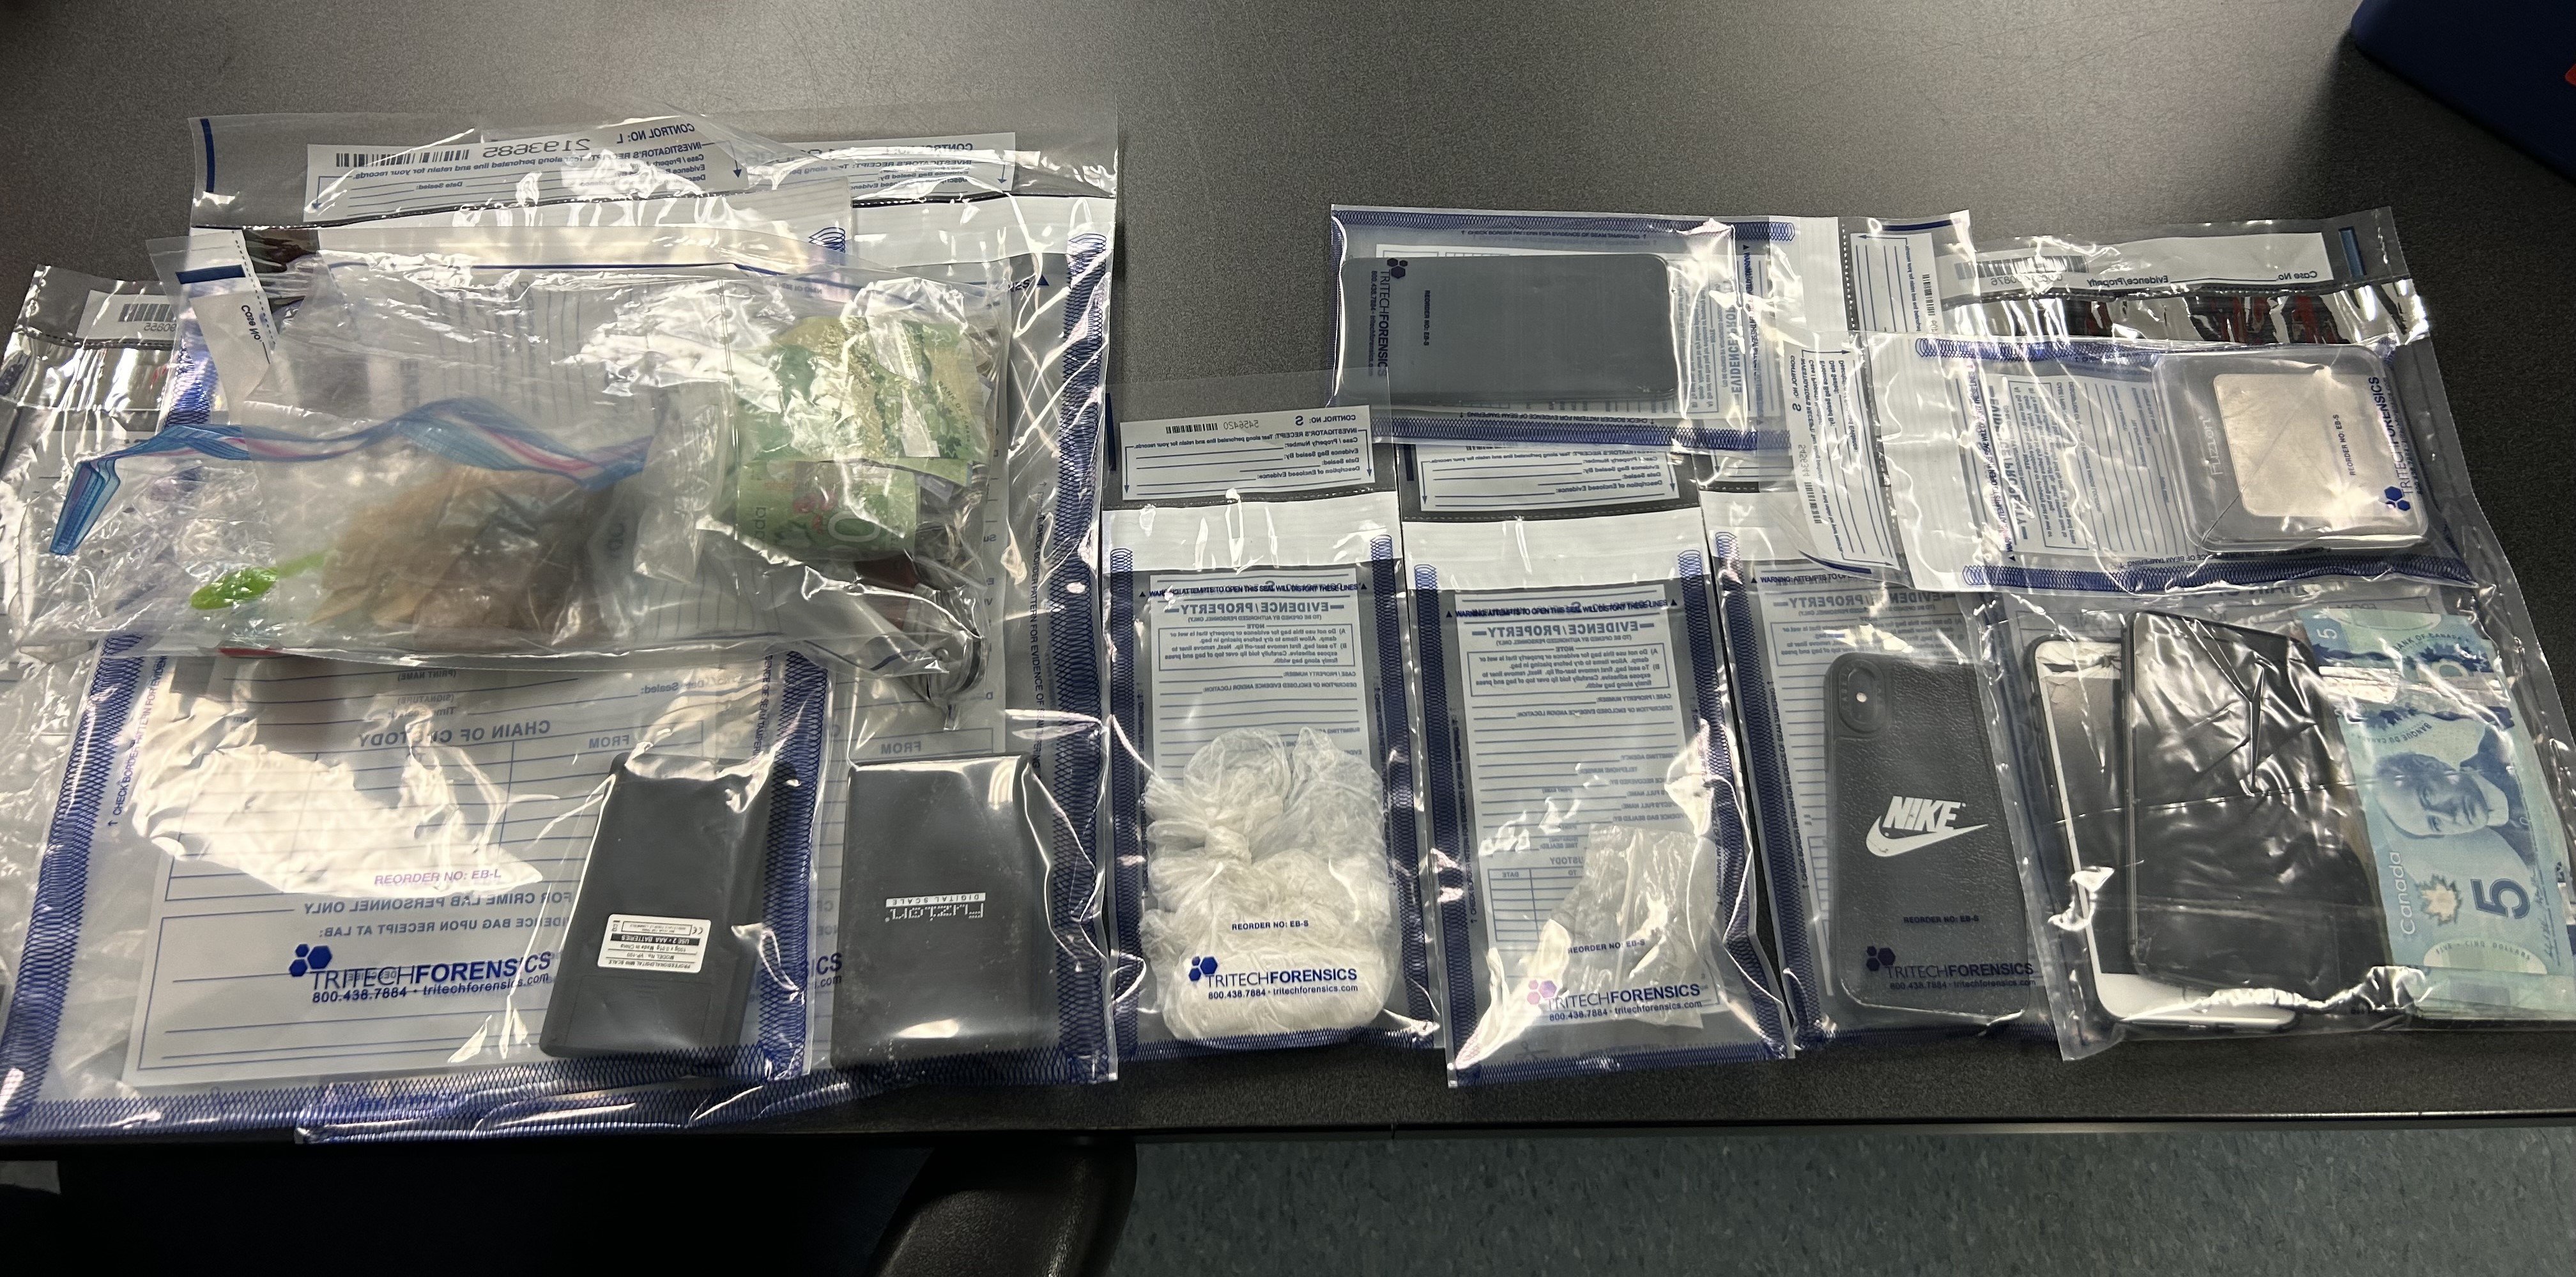 Man, youth from Toronto arrested after drugs seized in Lindsay: police